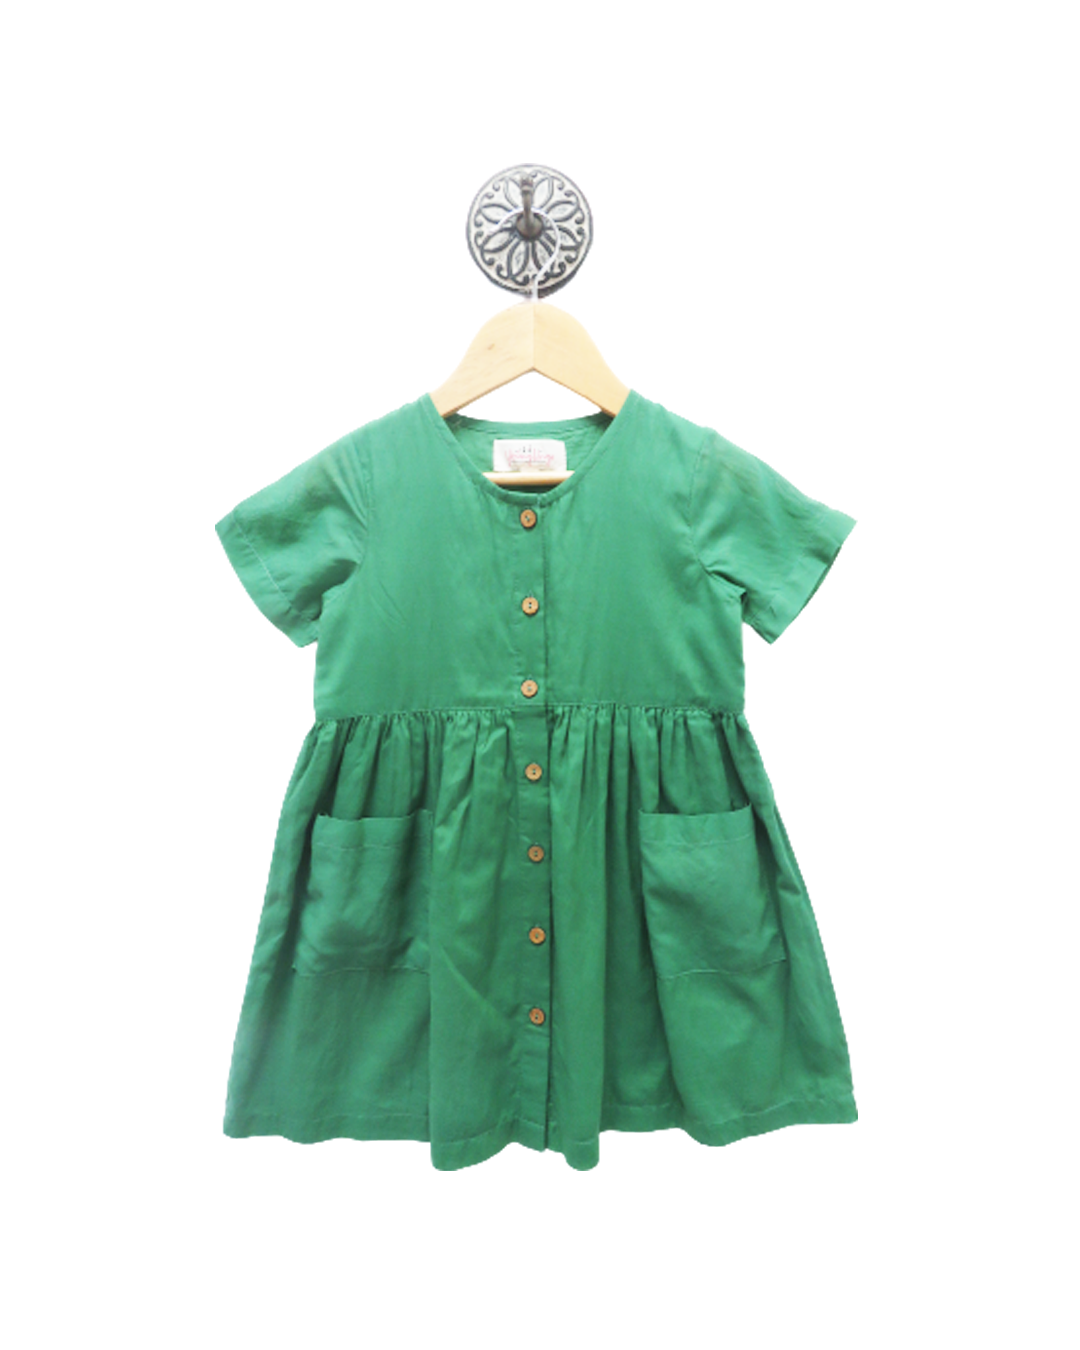 GREEN CASUAL DRESS WITH FRONT POCKET AND WOODEN BUTTONS